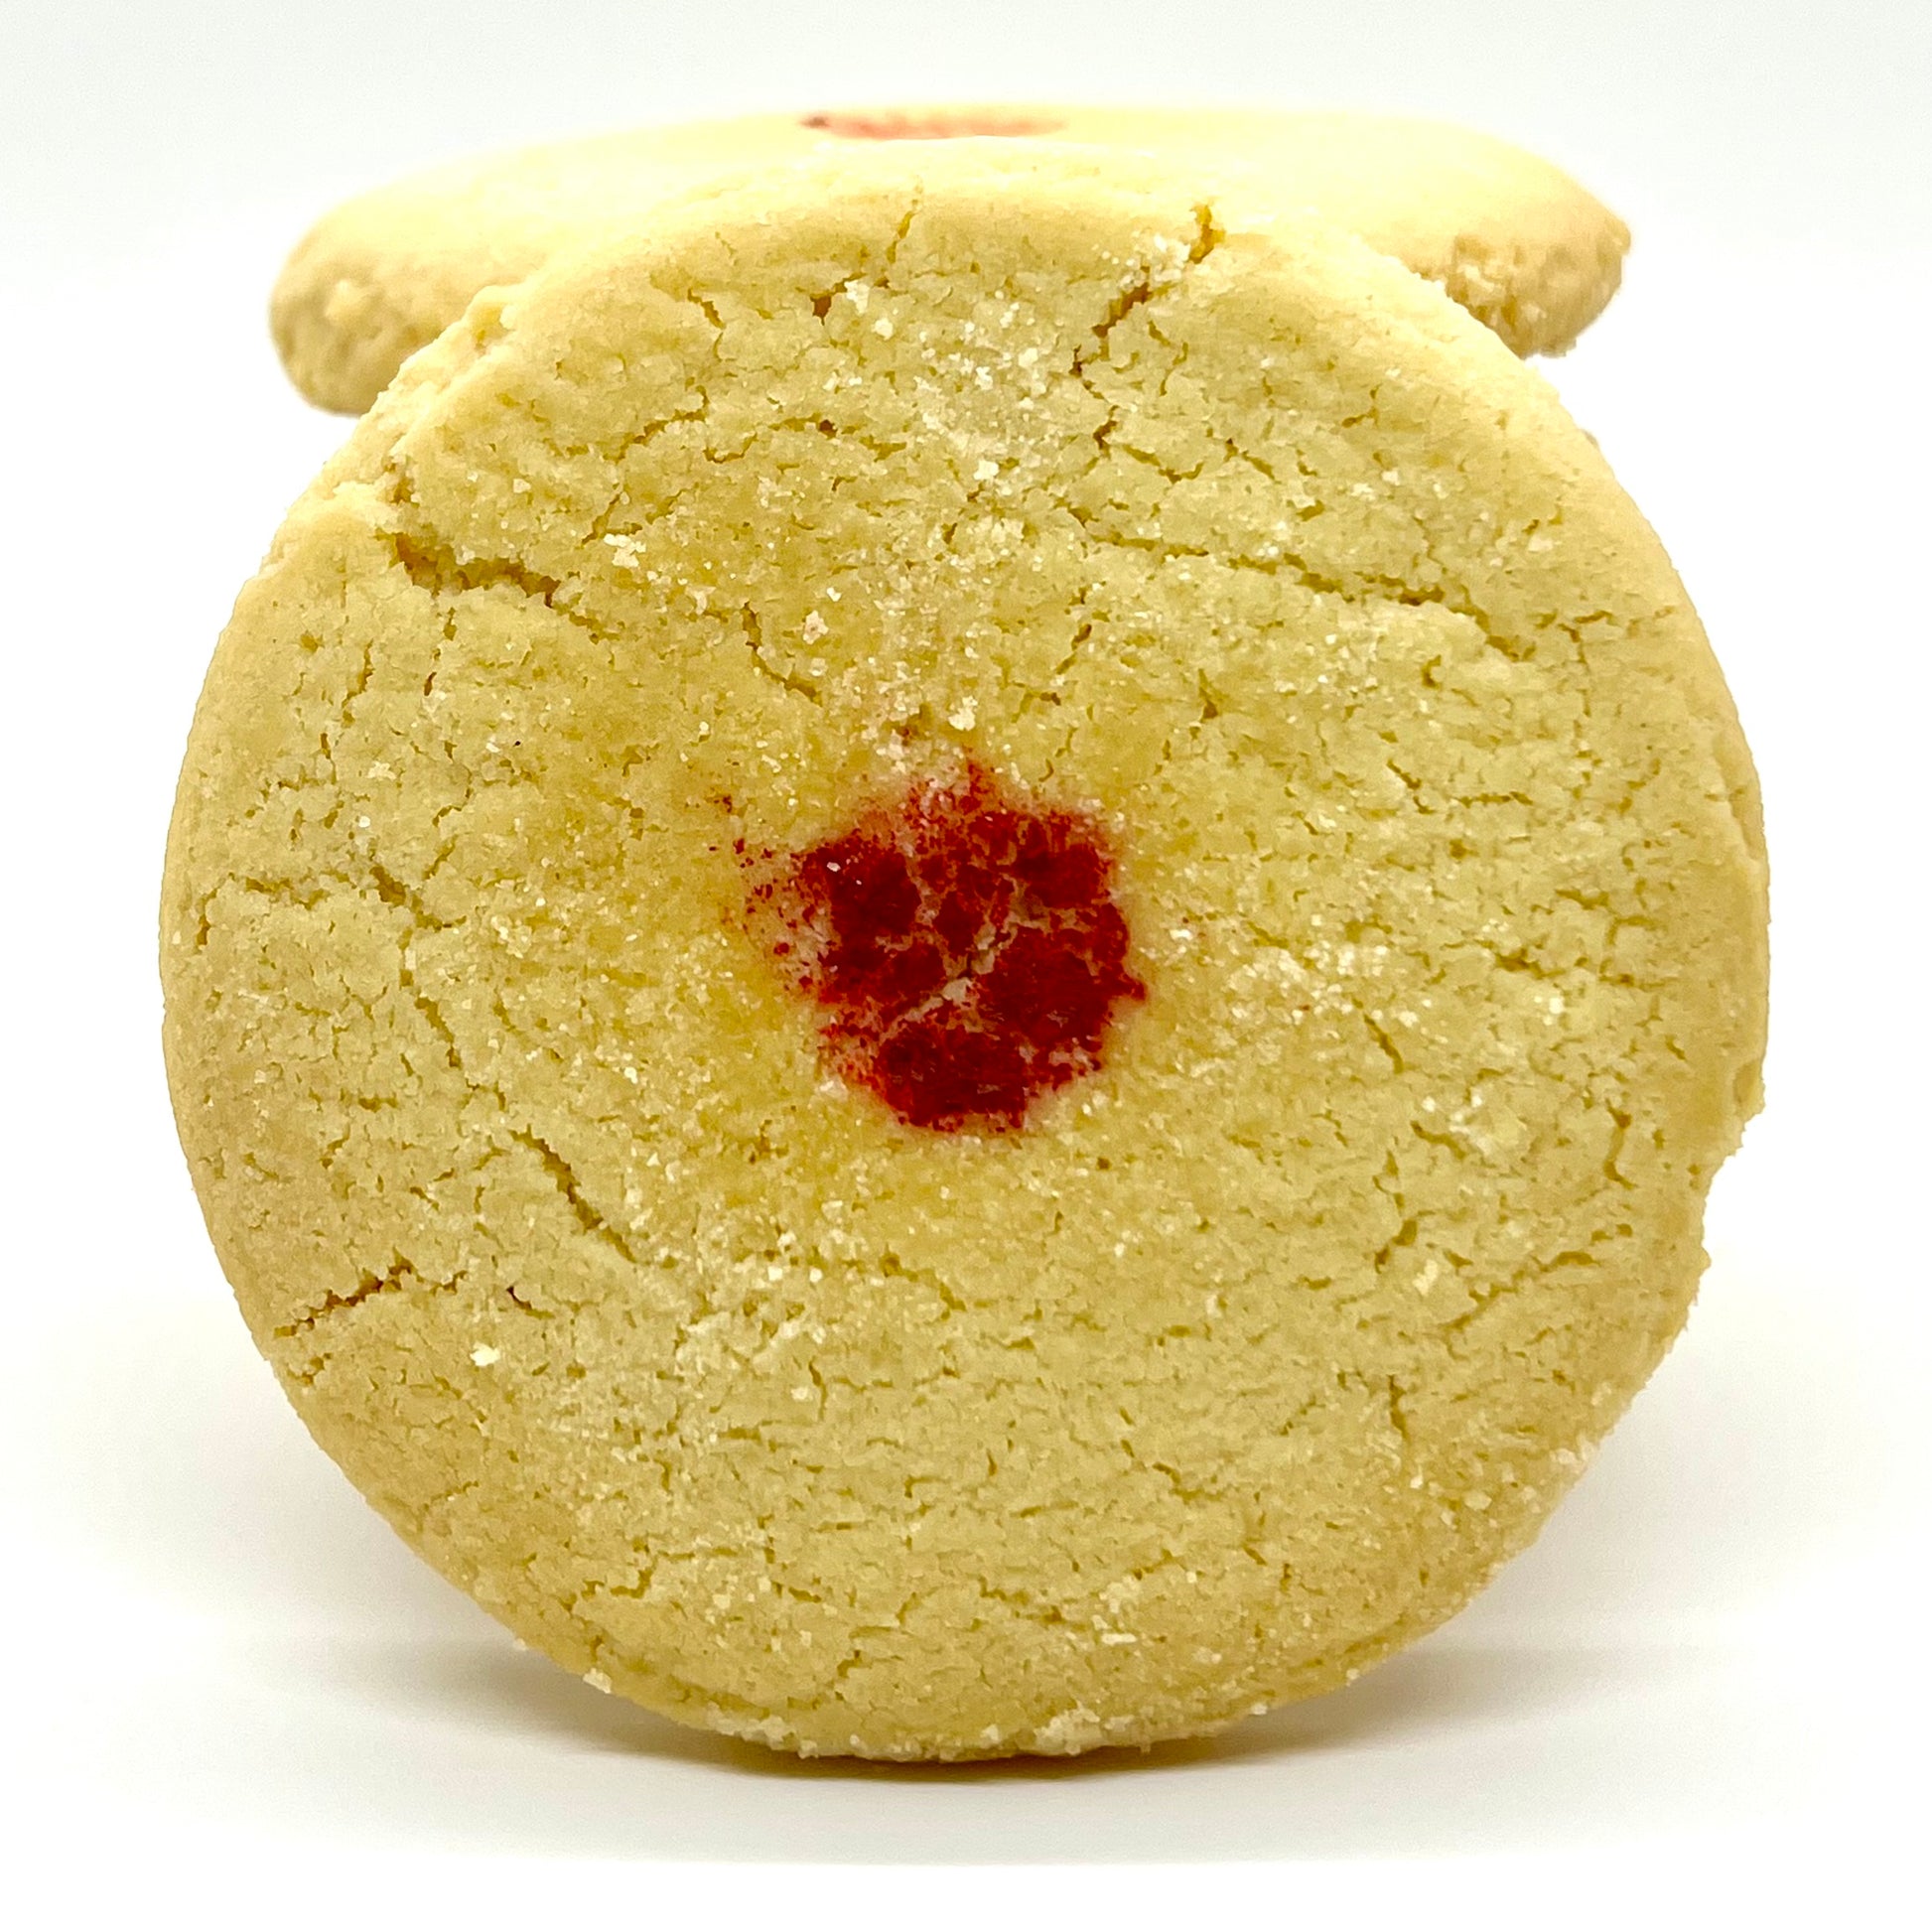 Almond Cookies - Wholesale Unlimited Inc.